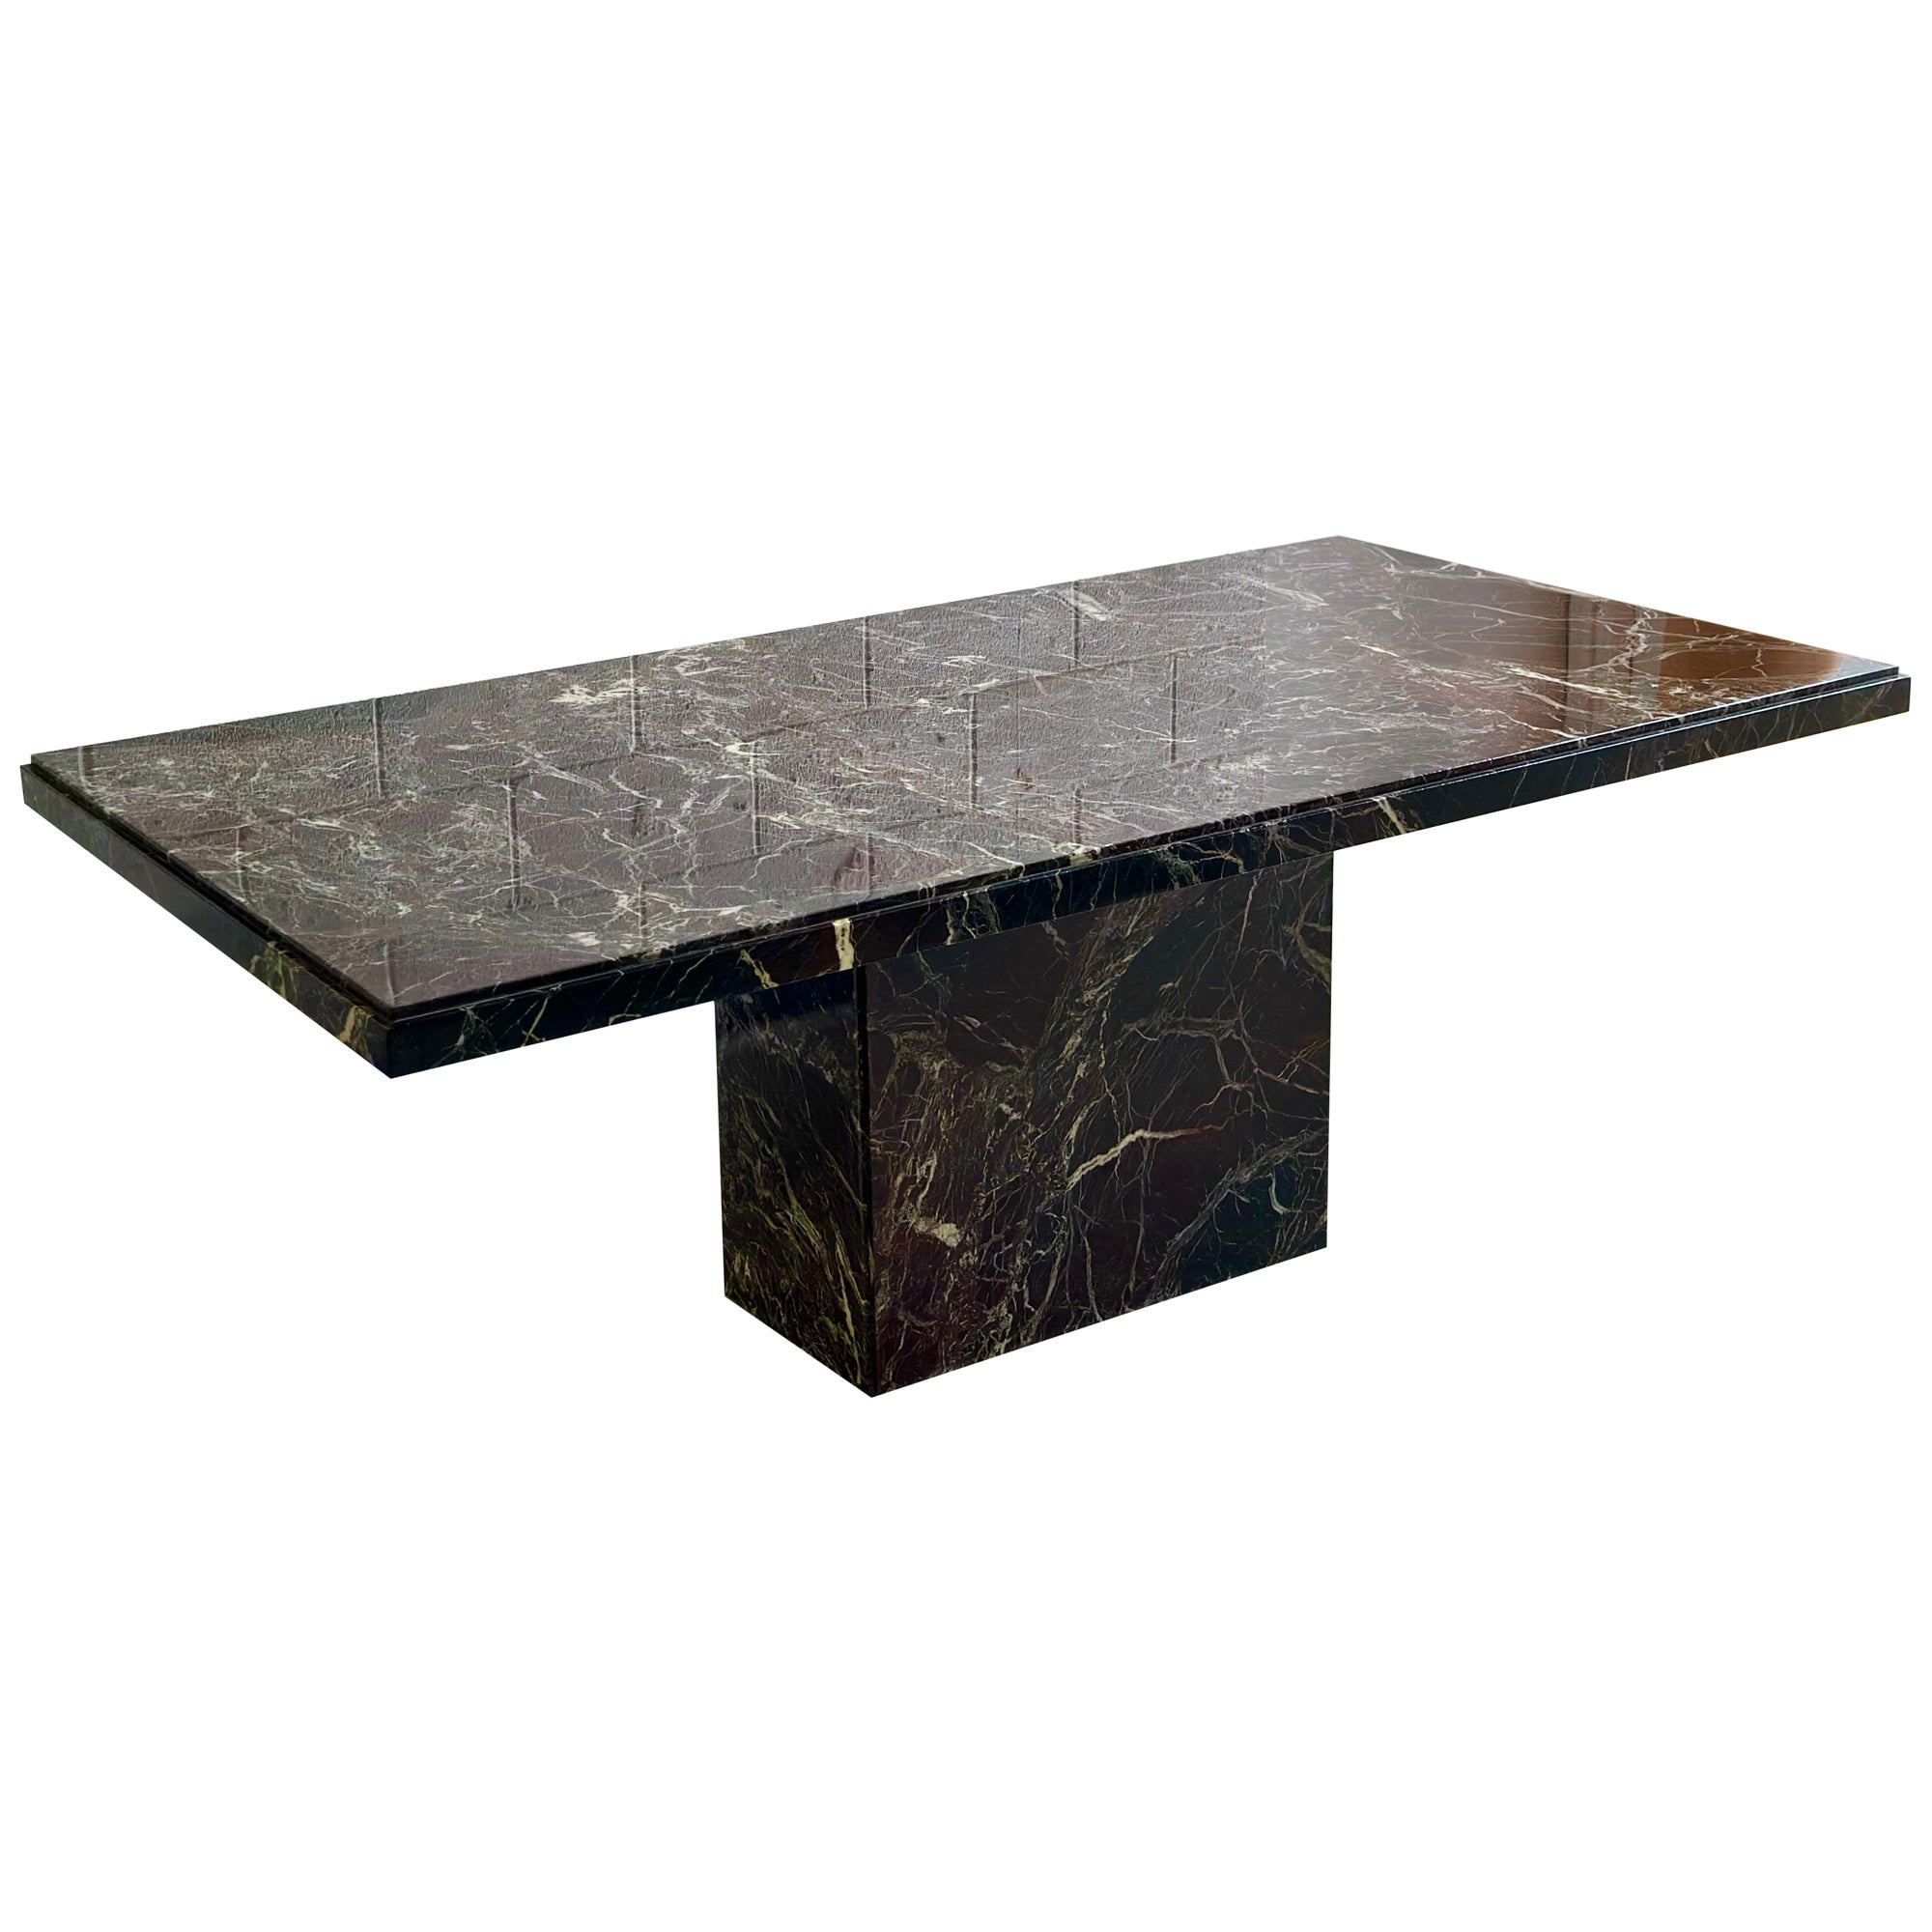 1970s Italian Rosso Levanto  Red Marble Stone Rectangular Pedestal Dining Table For Sale